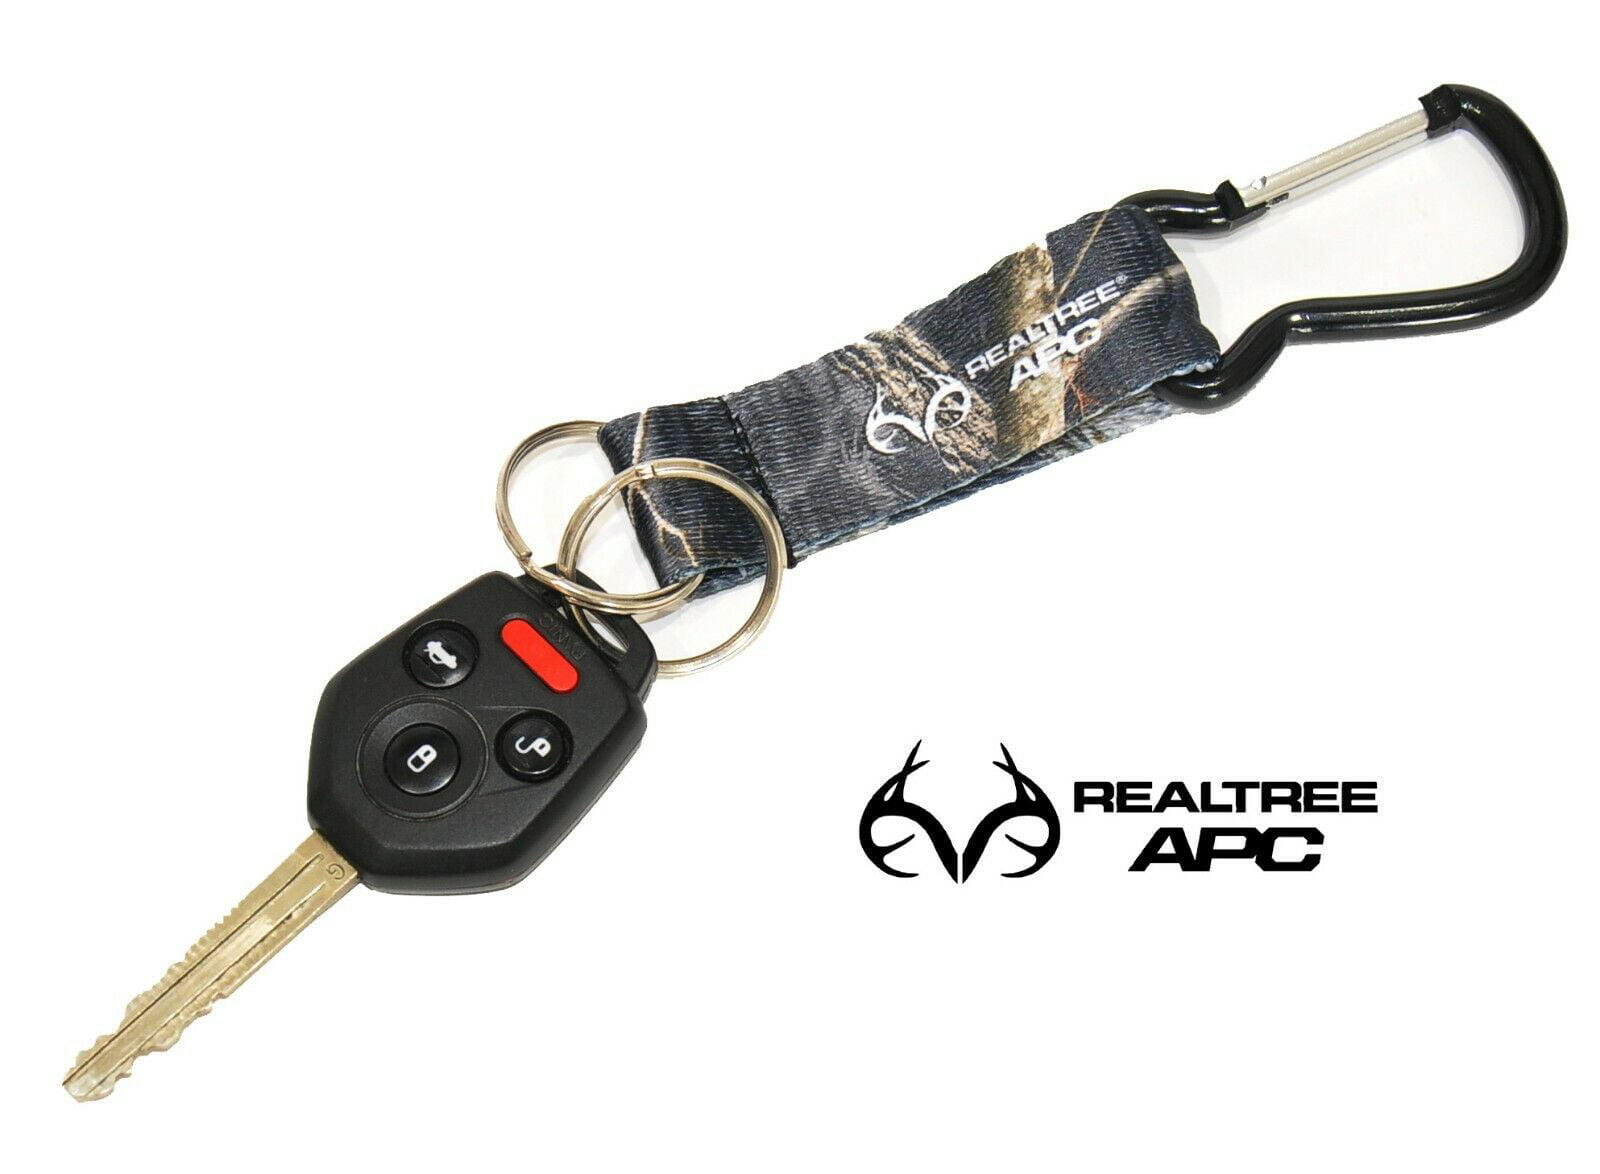 Realtree APS Snow Camo Keychain With Clip On Carabiner 